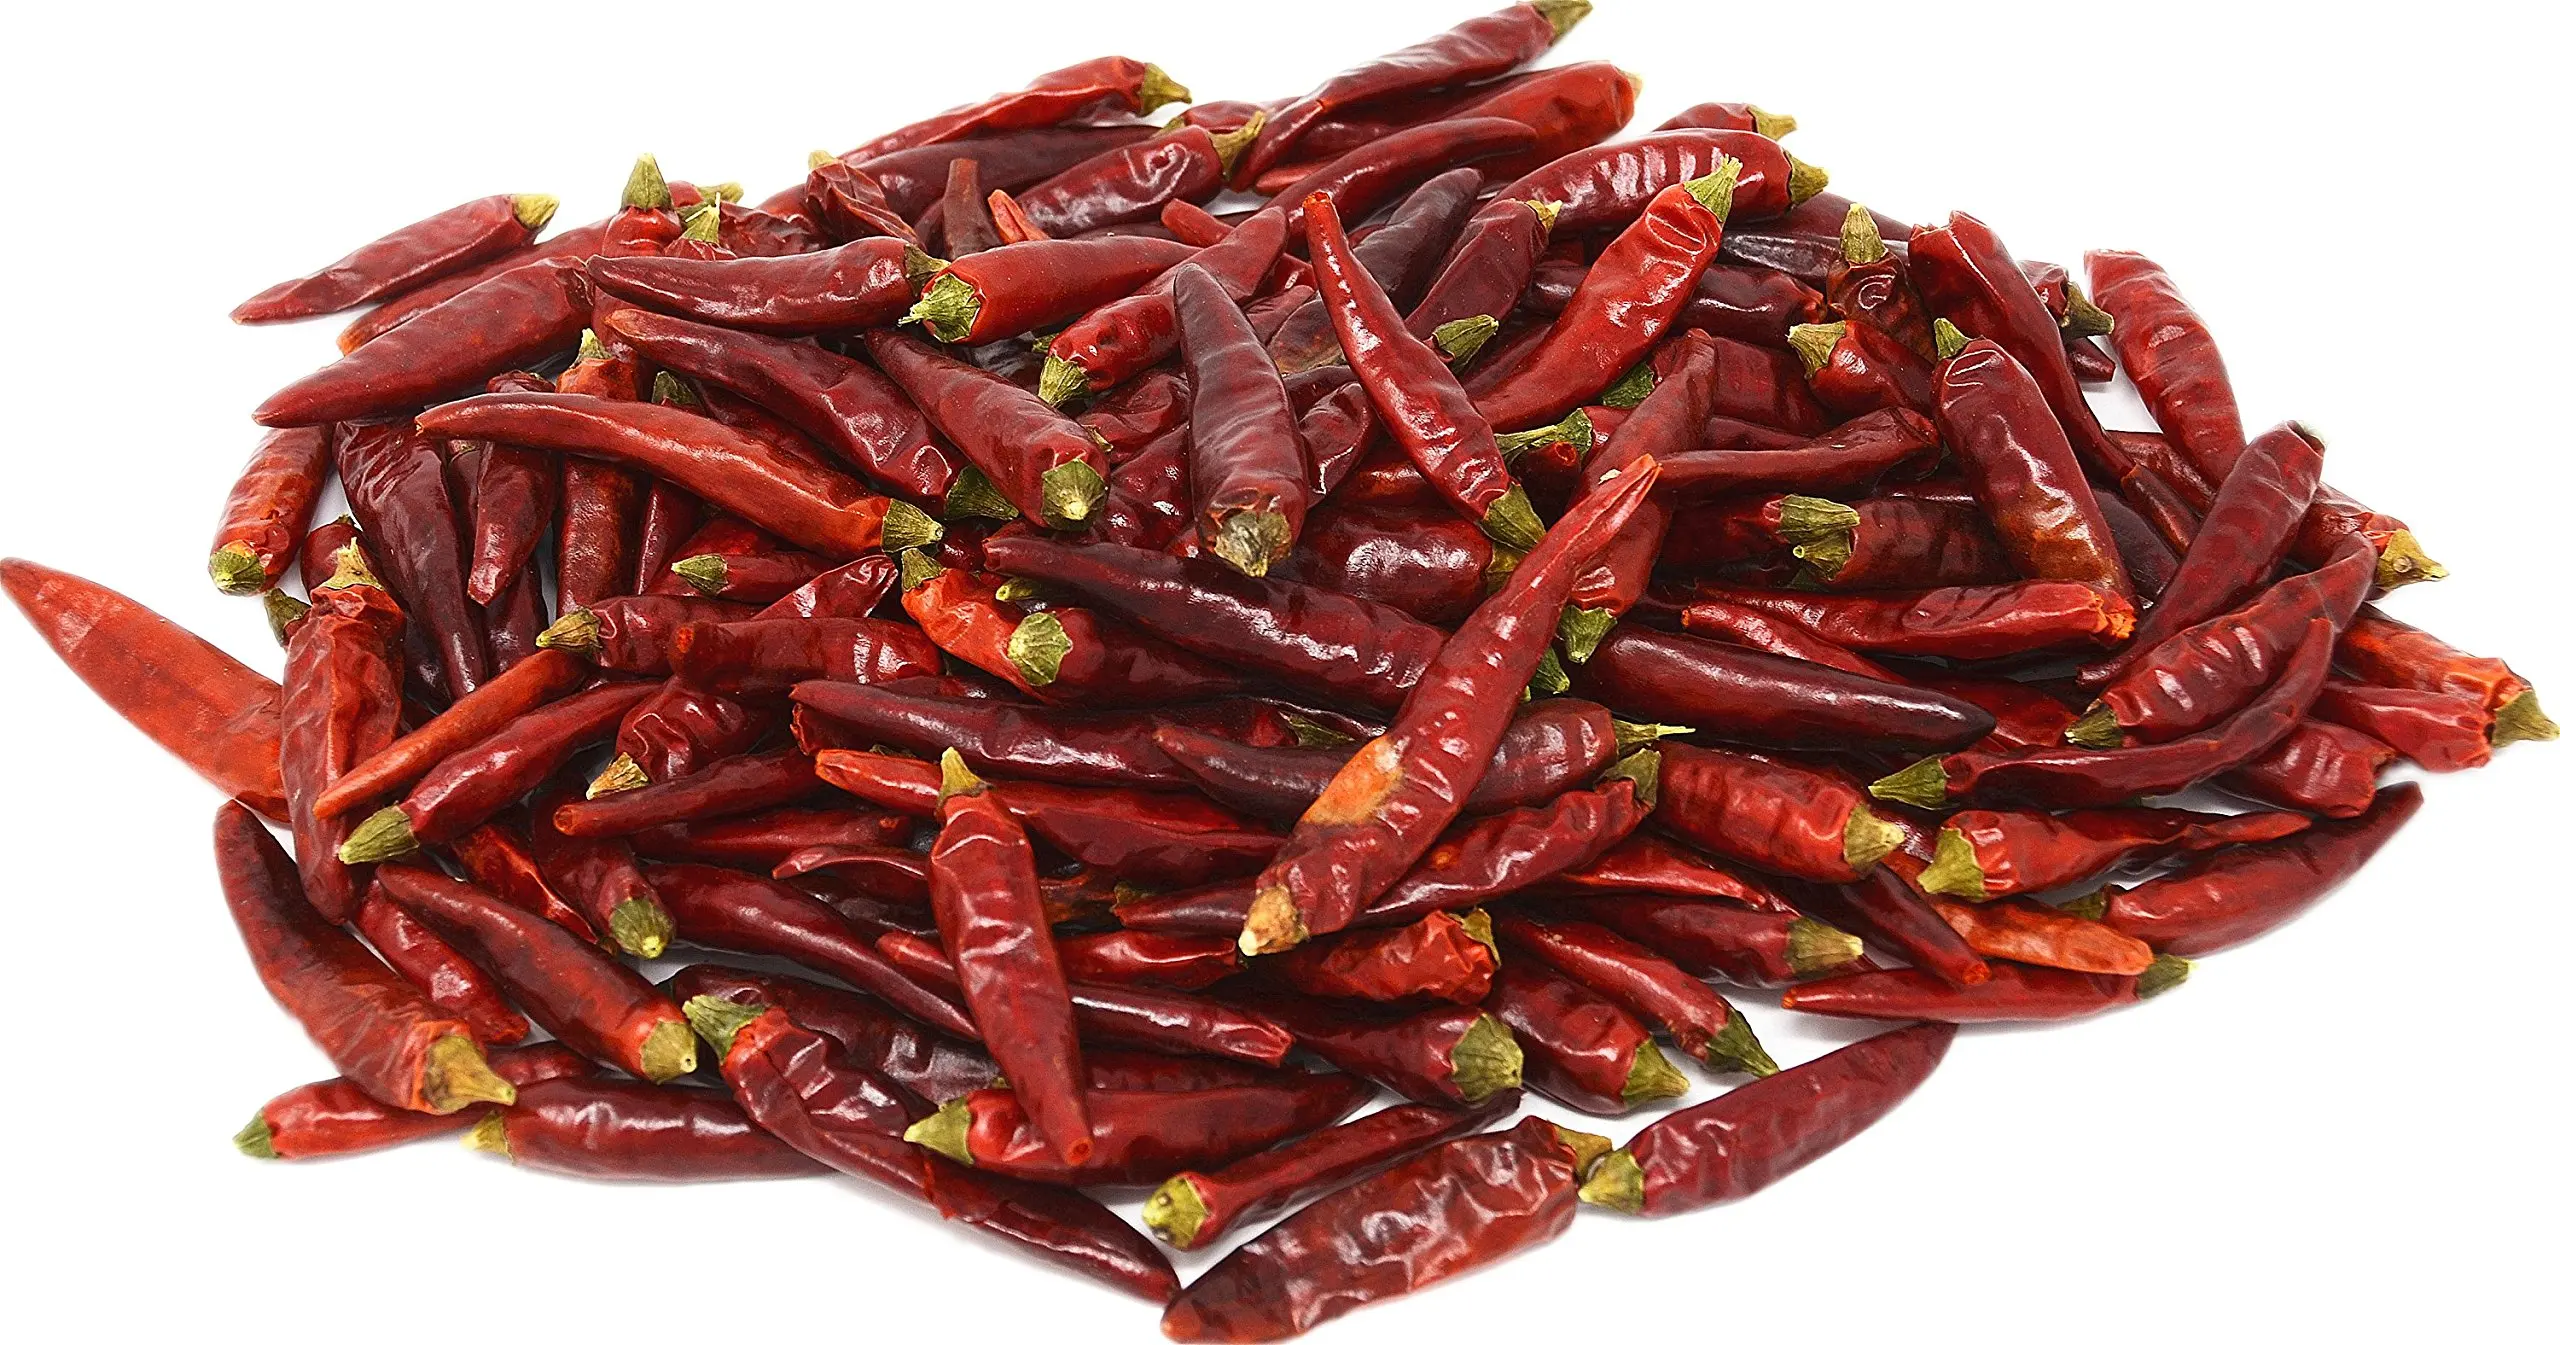 High Quality From Vietnam Agri Dry Chili Red Dry Organic Pepper Chili Dried Wholesale Cheap price